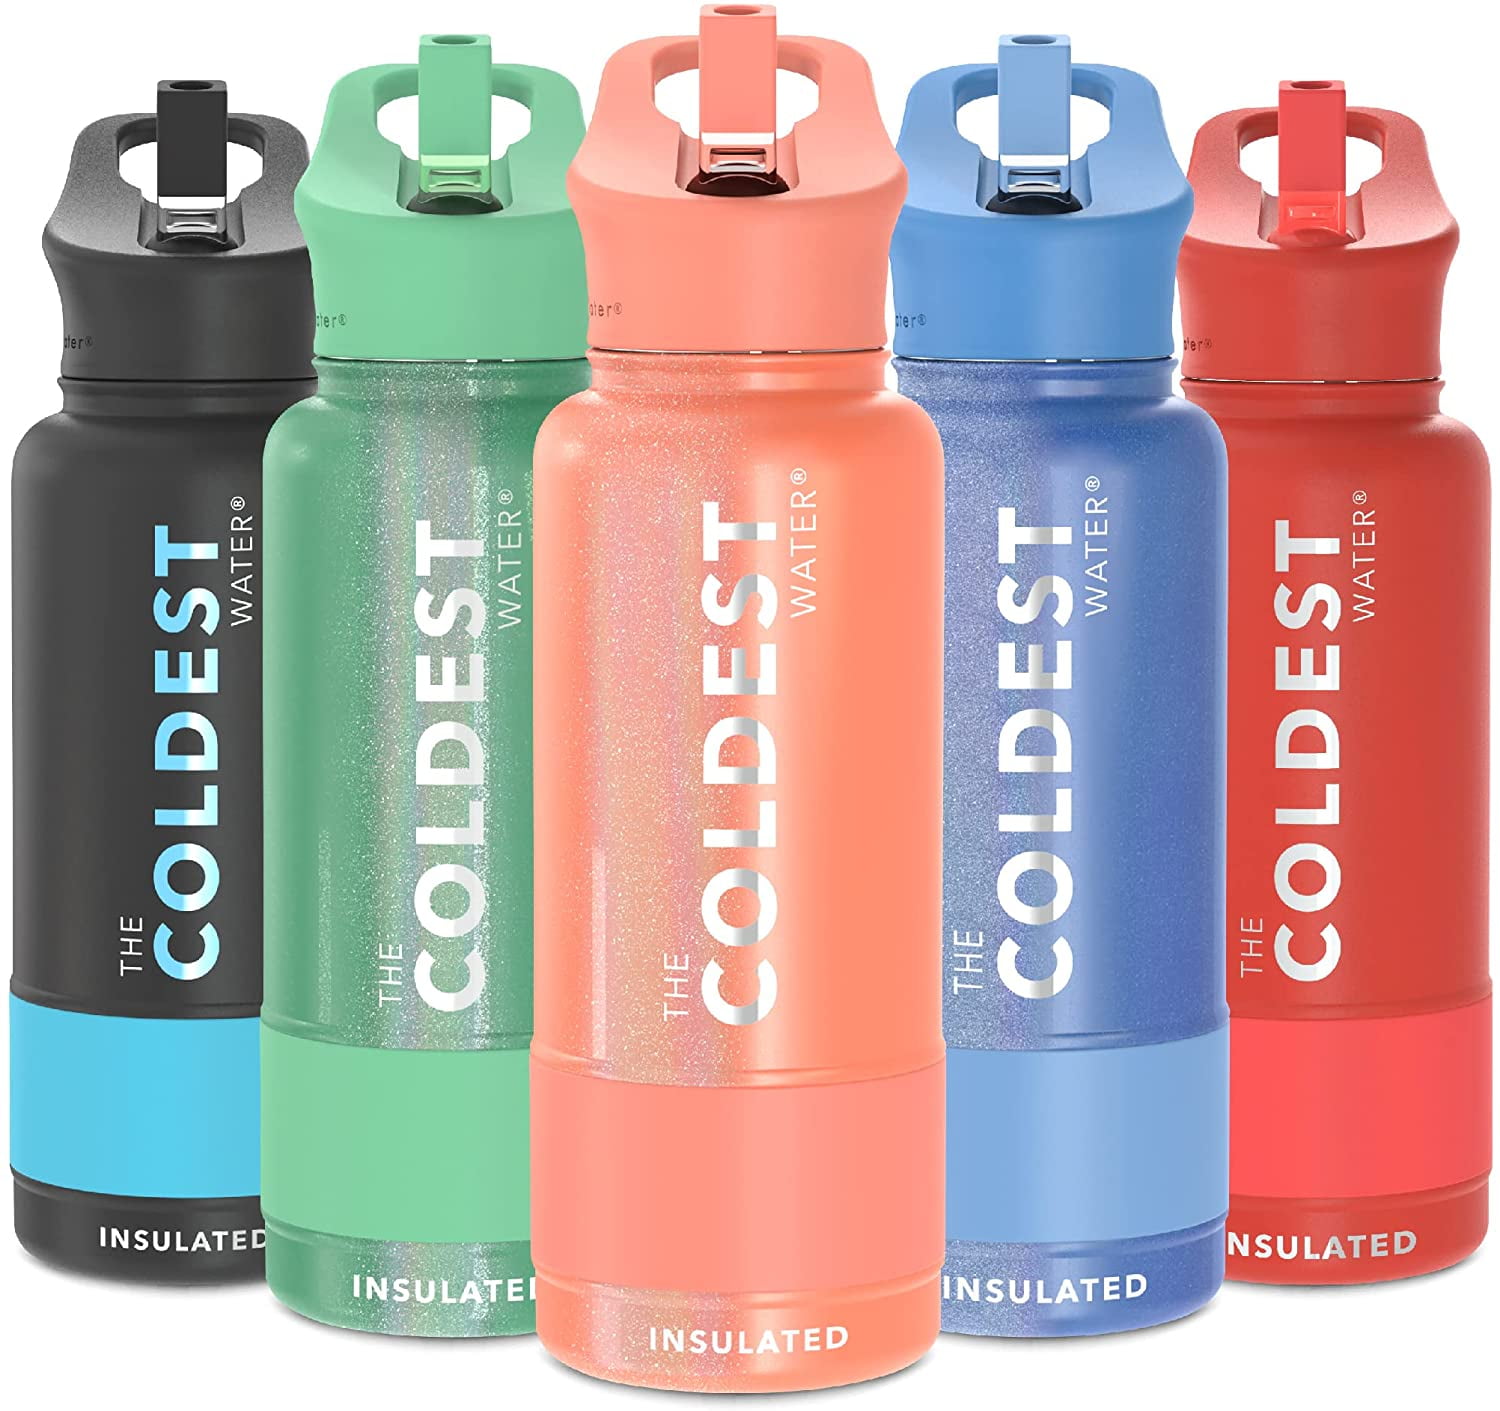 Coldest Sports Water Bottle - 32 oz (Straw Lid), Leak Proof, Vacuum  Insulated Stainless Steel, Hot Cold, Double Walled, Thermo Mug, Metal  Canteen (32 oz, Supernova Glitter) 